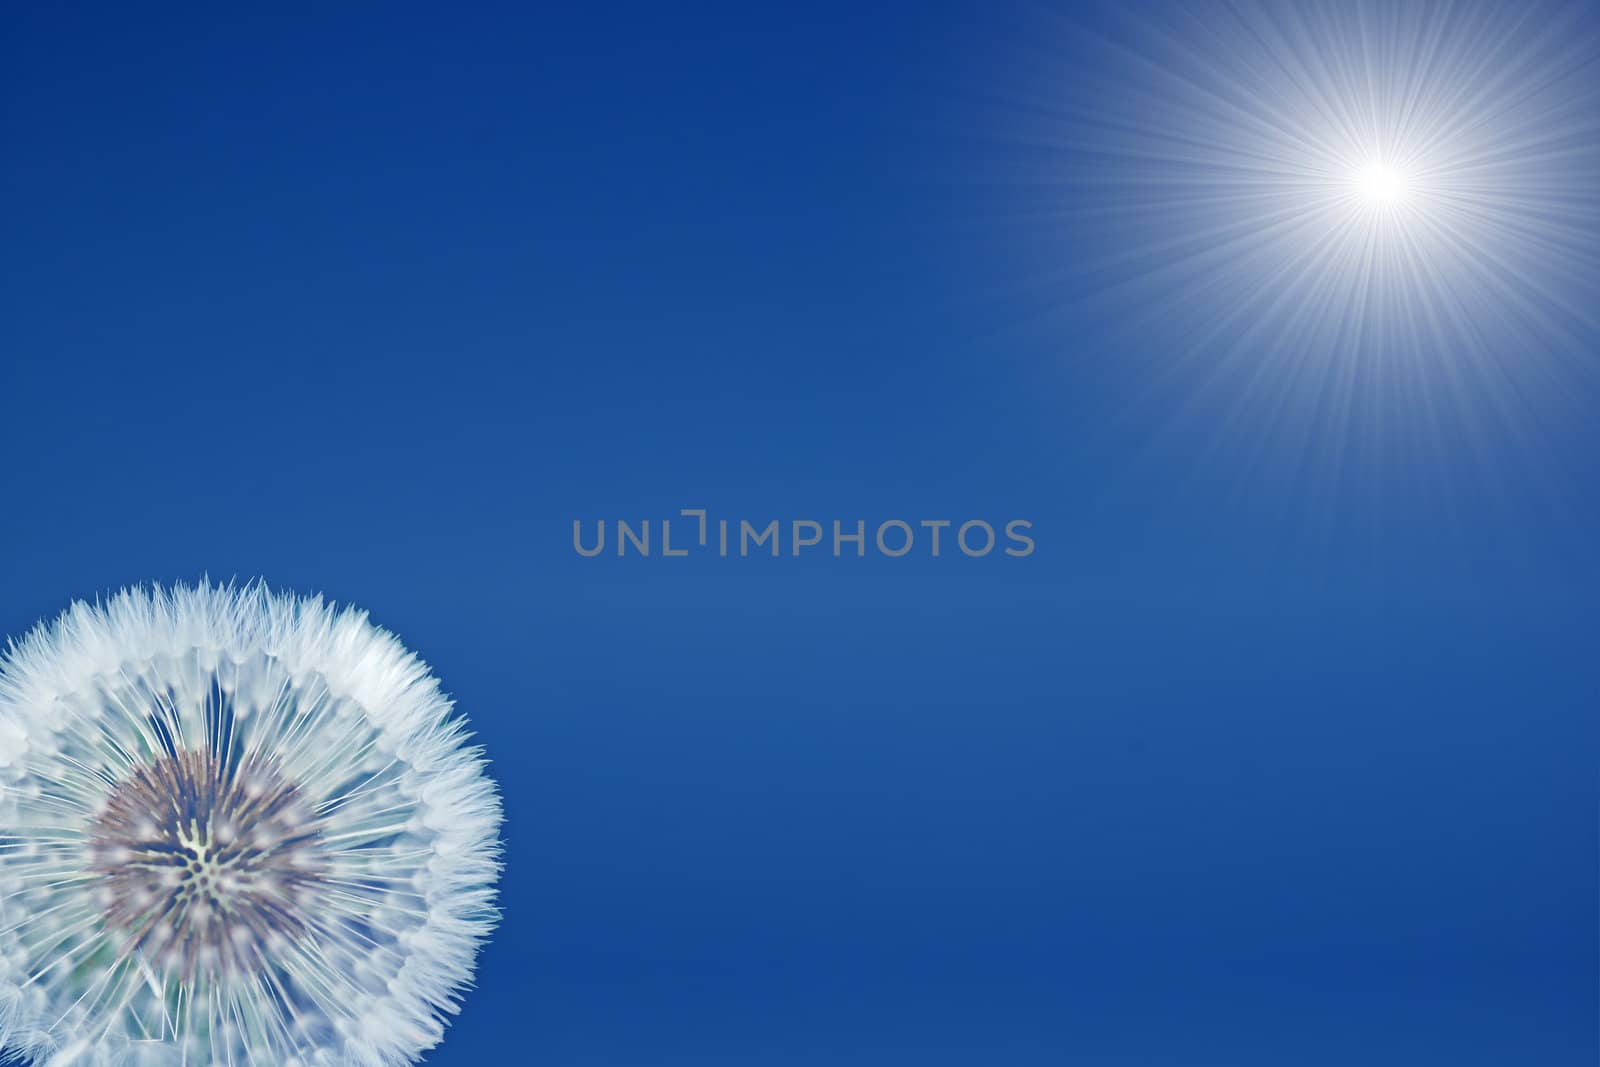 Blue sky and sun with dandelion by xfdly5